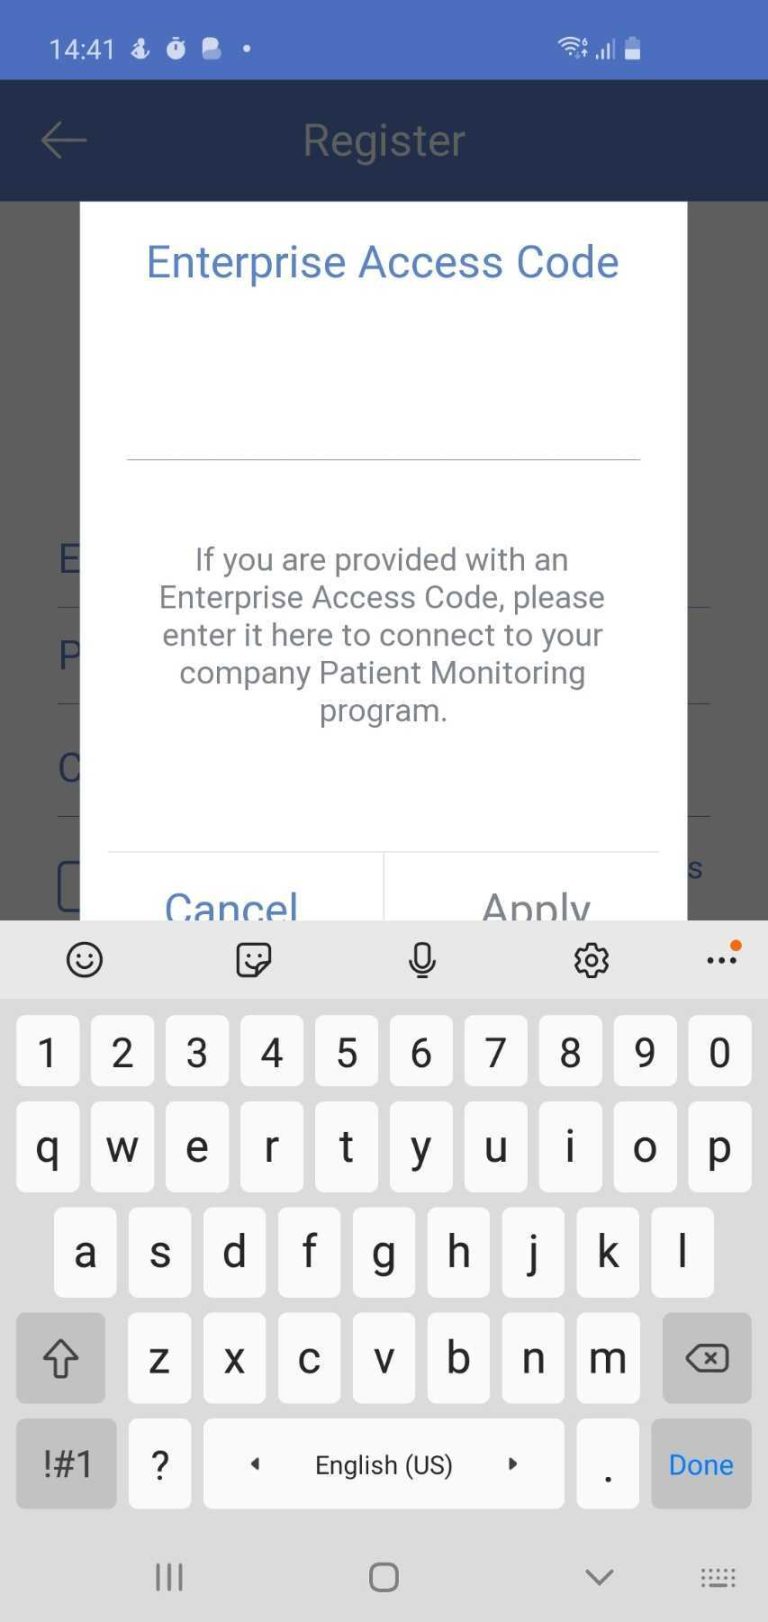 Mobile keyboard overlaps “Cancel” and “Apply” button when registering with enterprise code